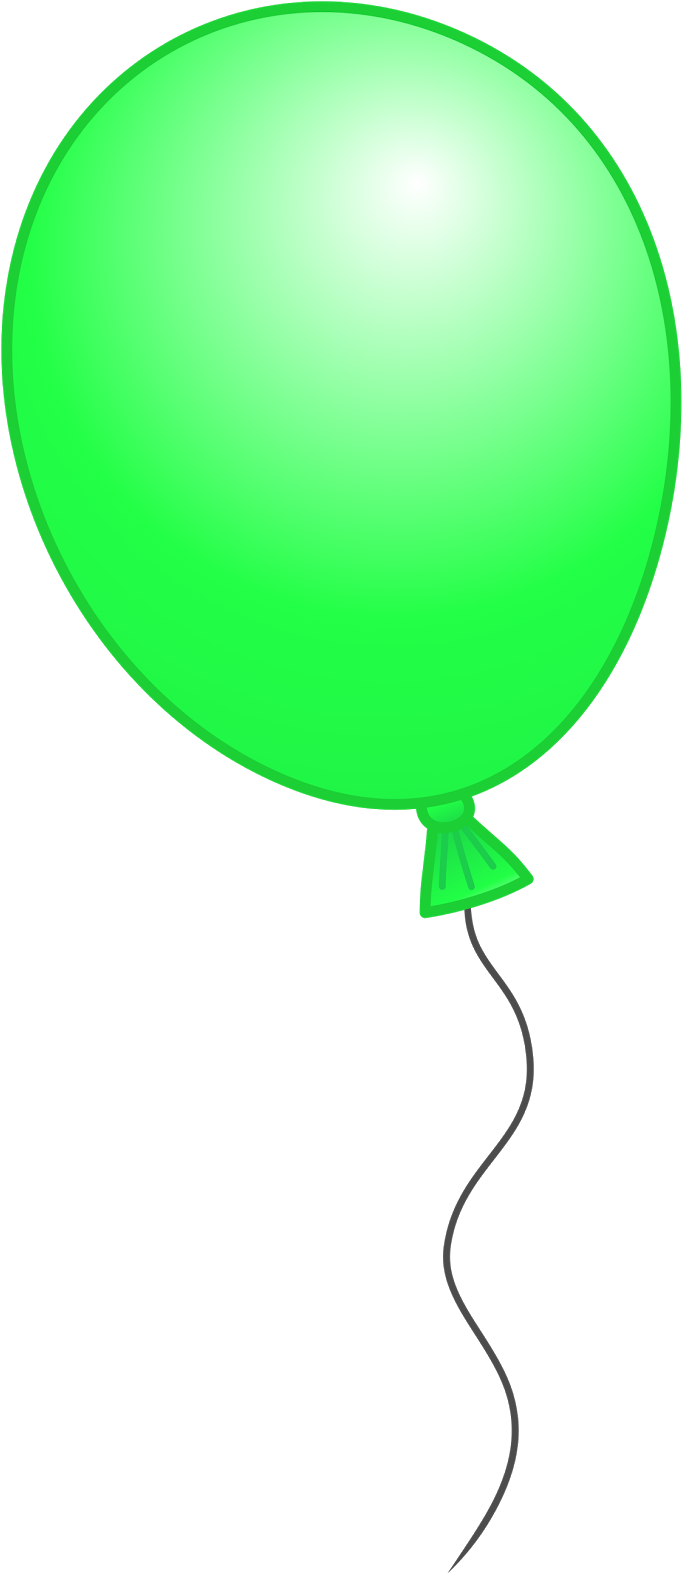 A Selection Of Balloons To Use In Your Projects Or - Green Balloon With Black Background (724x1600)